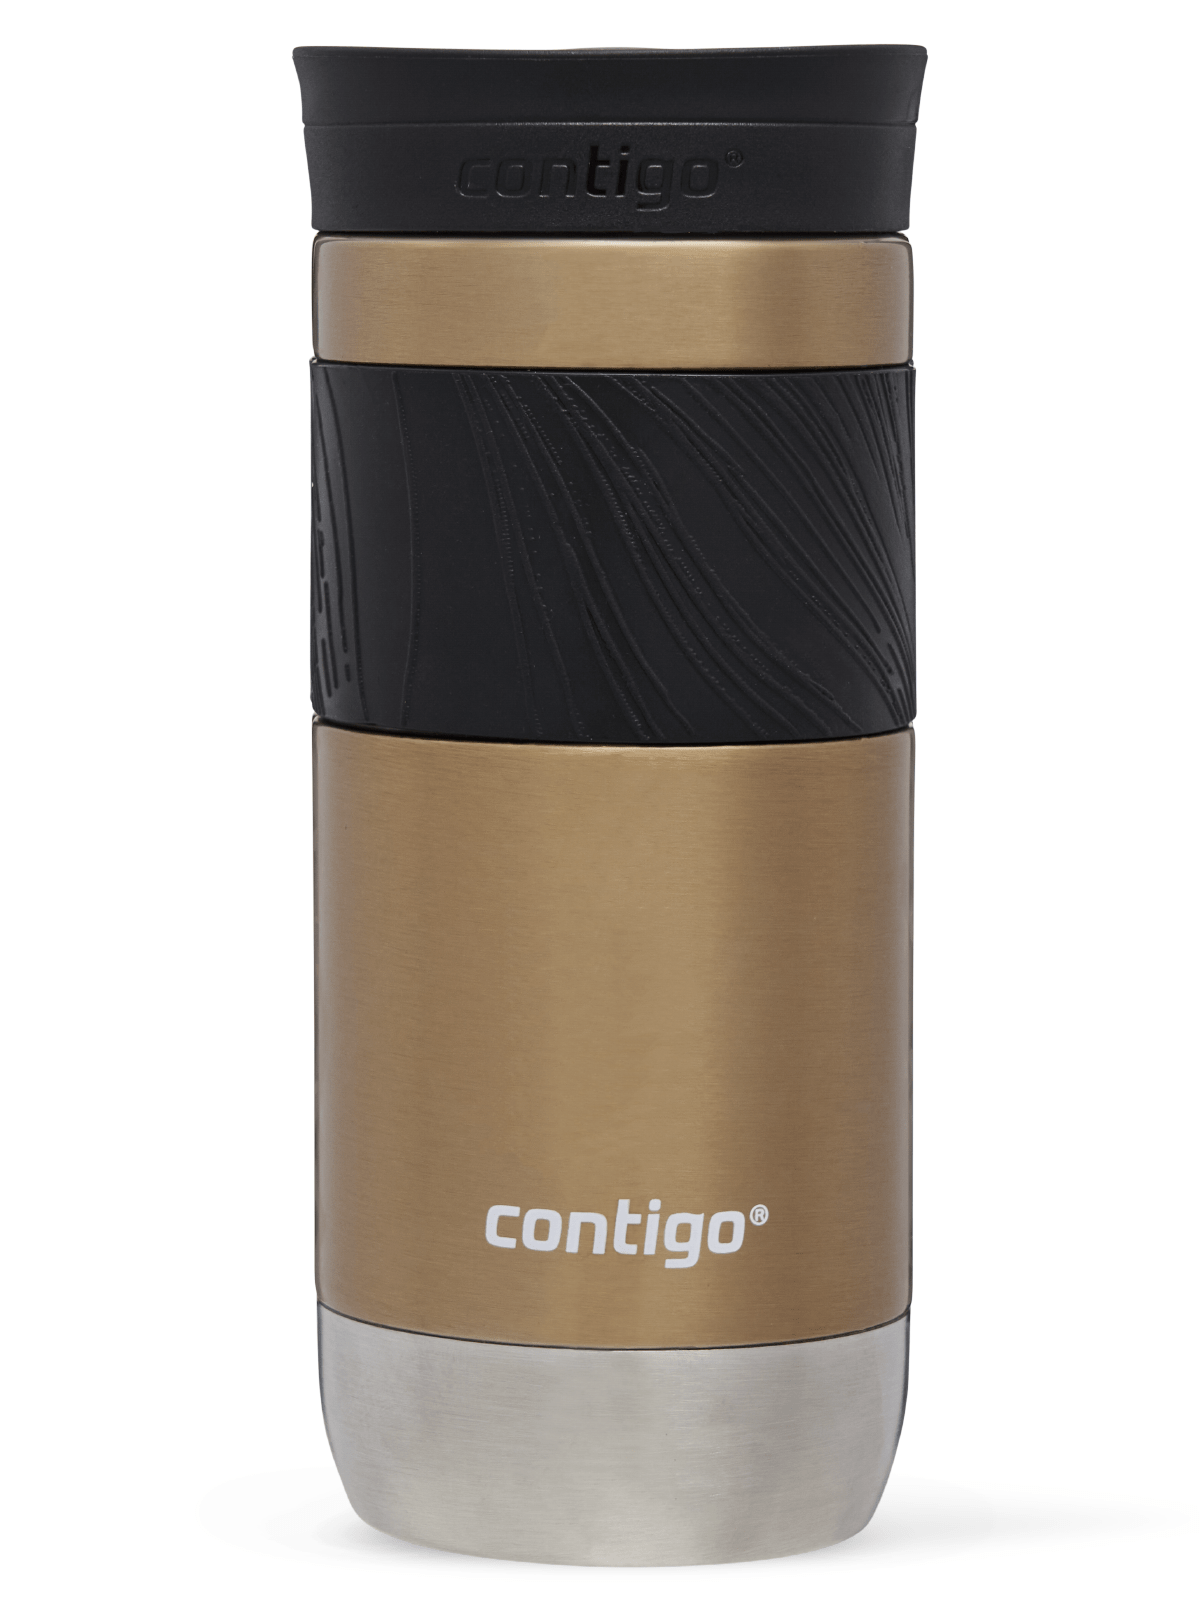 Gold Box - Contigo AUTOSEAL Chill Stainless Steel Water